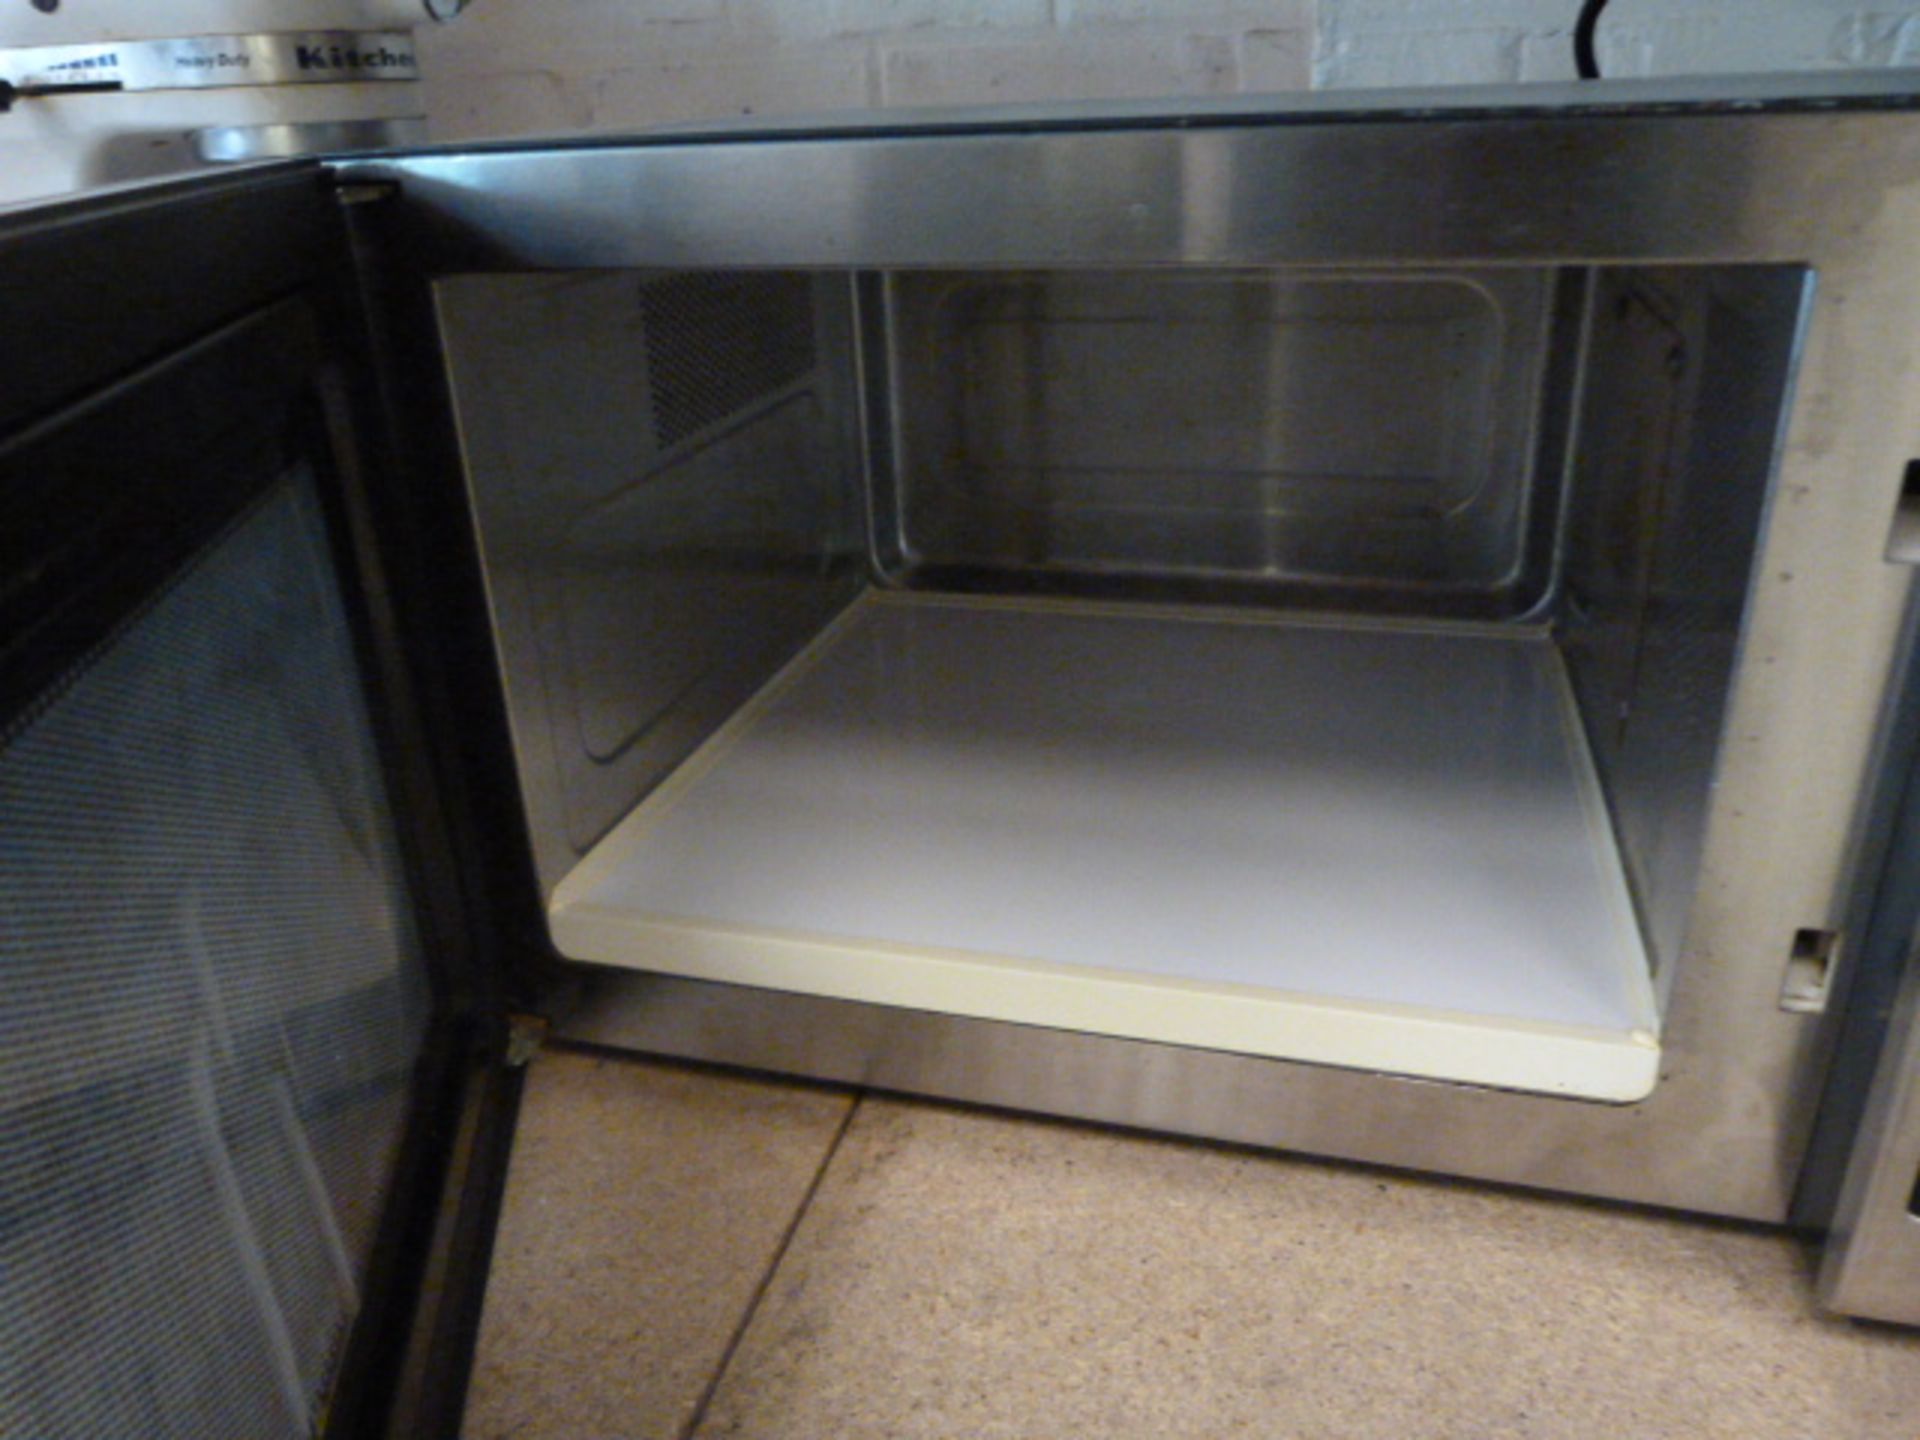 Samsung Microwave Oven - Image 2 of 2